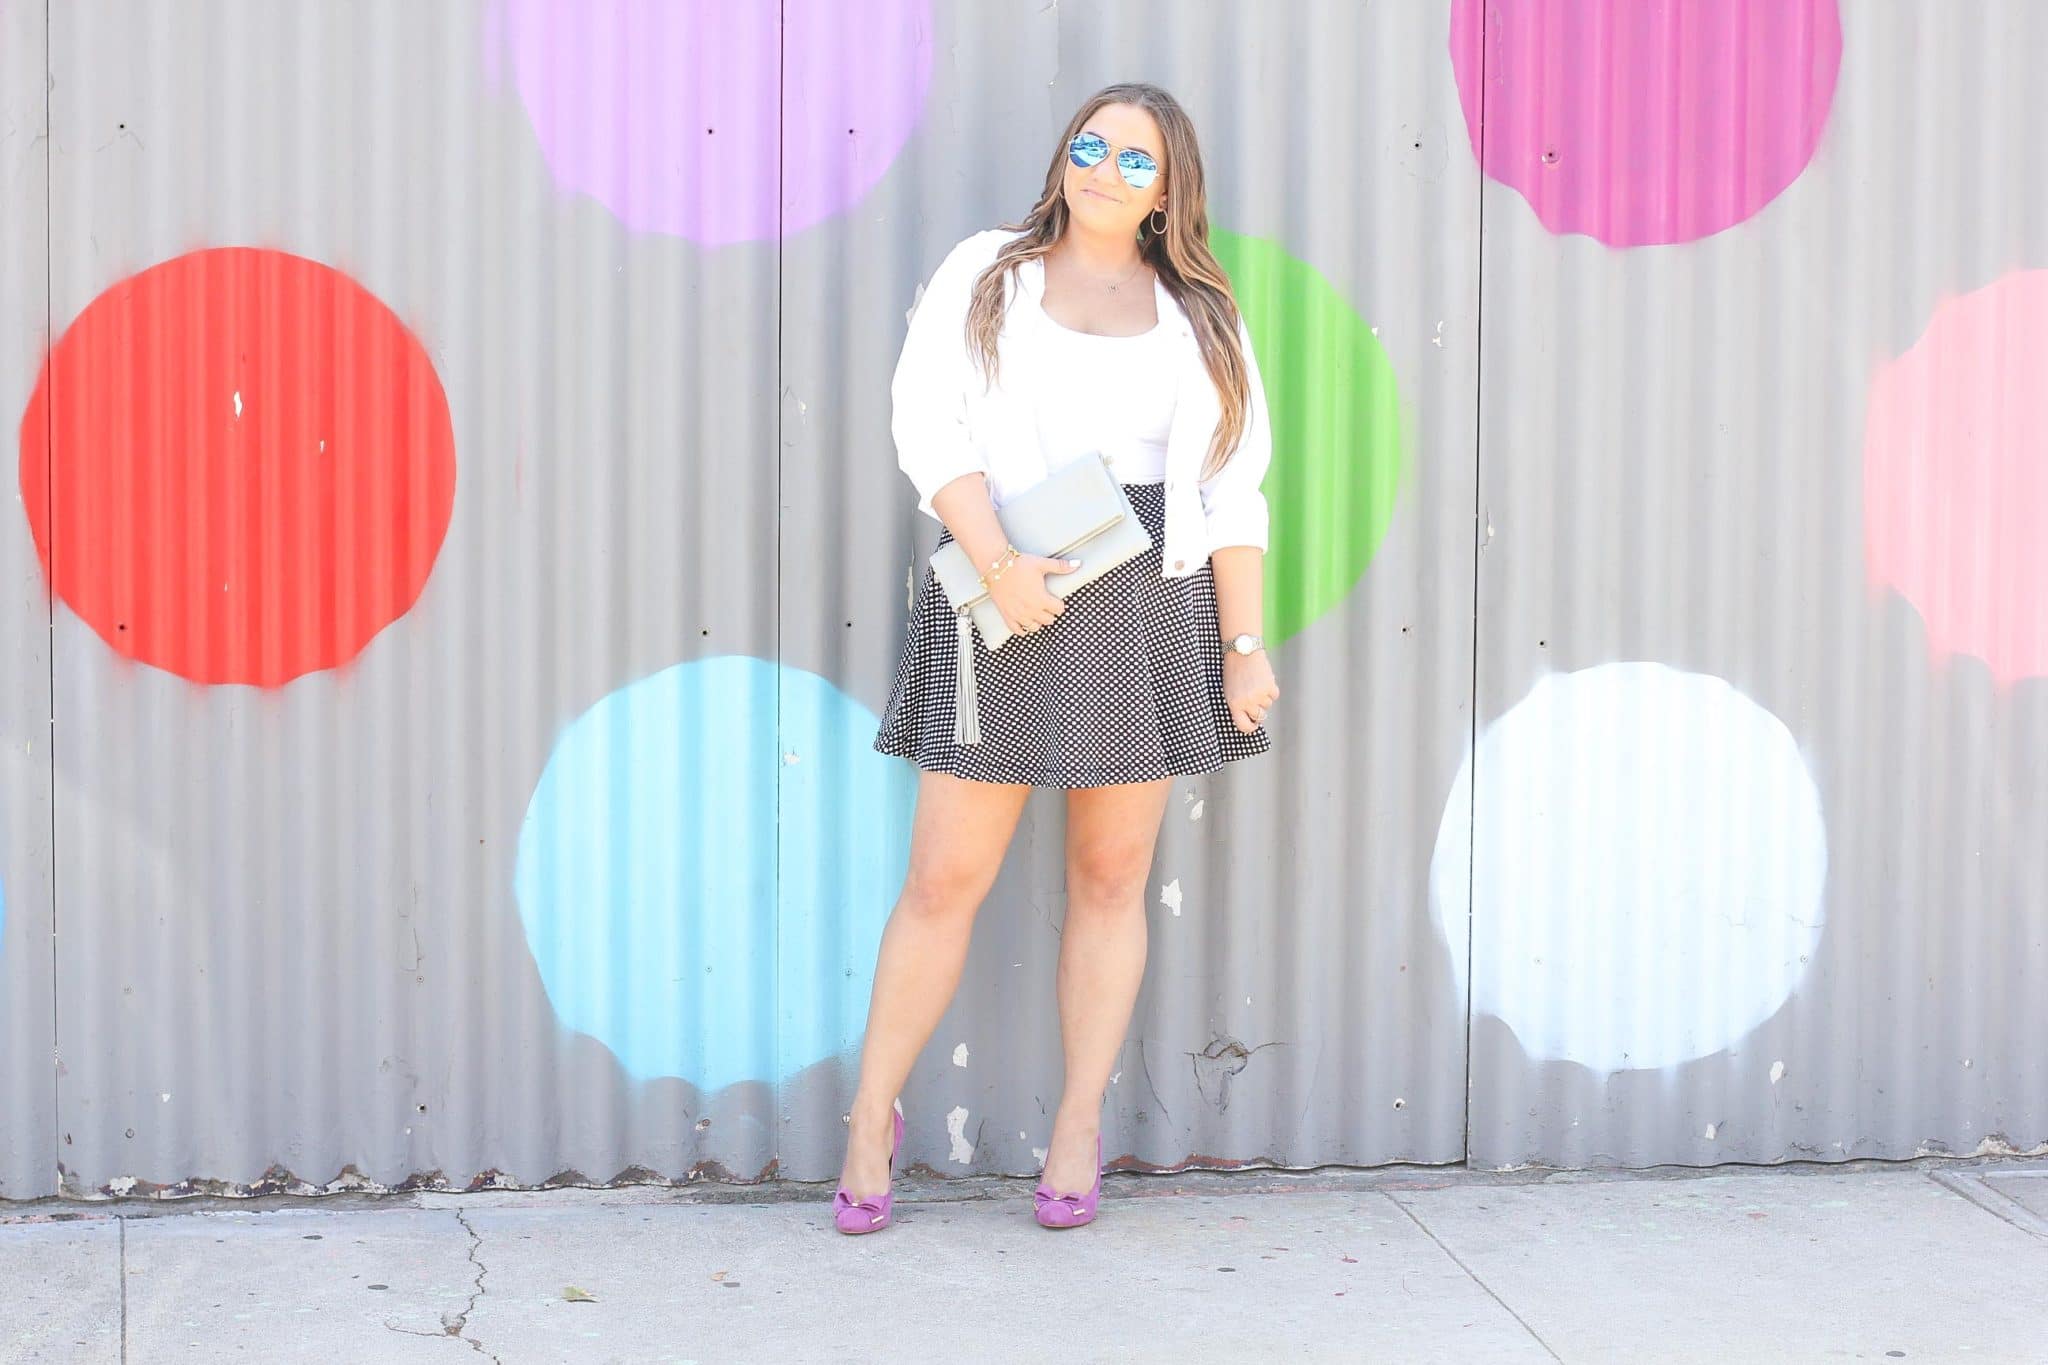 missyonmadison, polka dot skirt, polka dot wall, la blogger, fall style, fall fashion, fall blogger, currently wearing, melissa tierney, melissa tierney instagram, pink pumps, gigi new york, gigi new york clutch, fuschia pumps, pink bow pumps, michael kors heels, michael kors pumps, polka dot skirt, white moto jacket, white crop top, white short sleeve crop top, how to style polka dots,